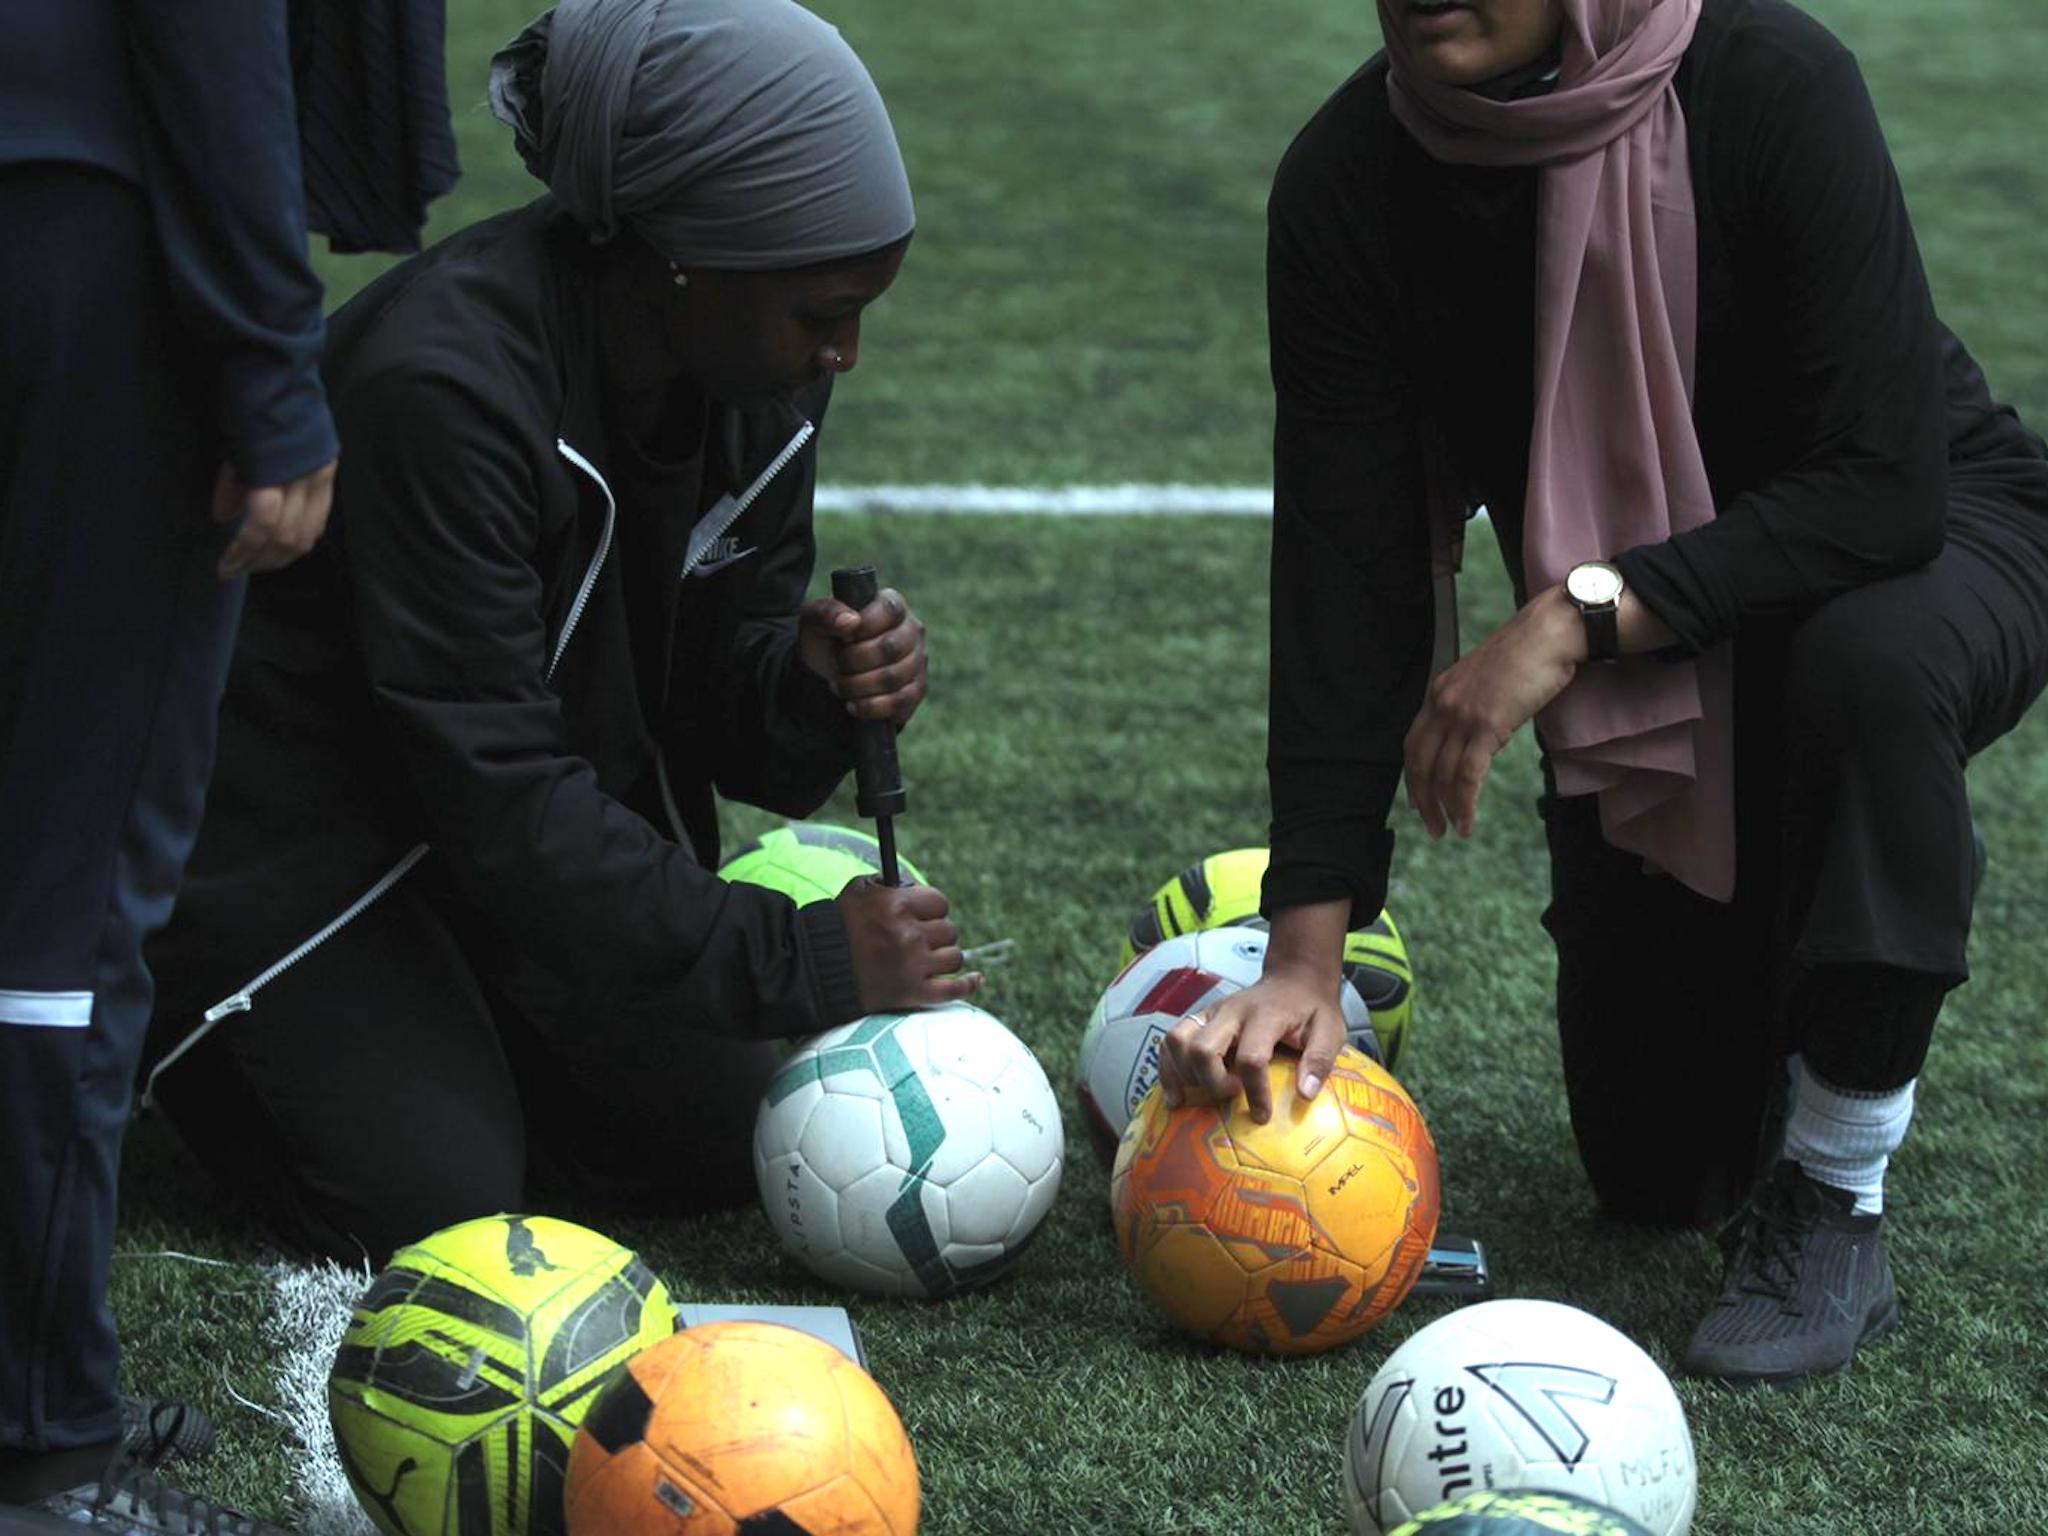 ’This feels like an exciting time that will make a difference for sports groups like ours and the women who play for us,’ says Sisterhood FC’s Saleh